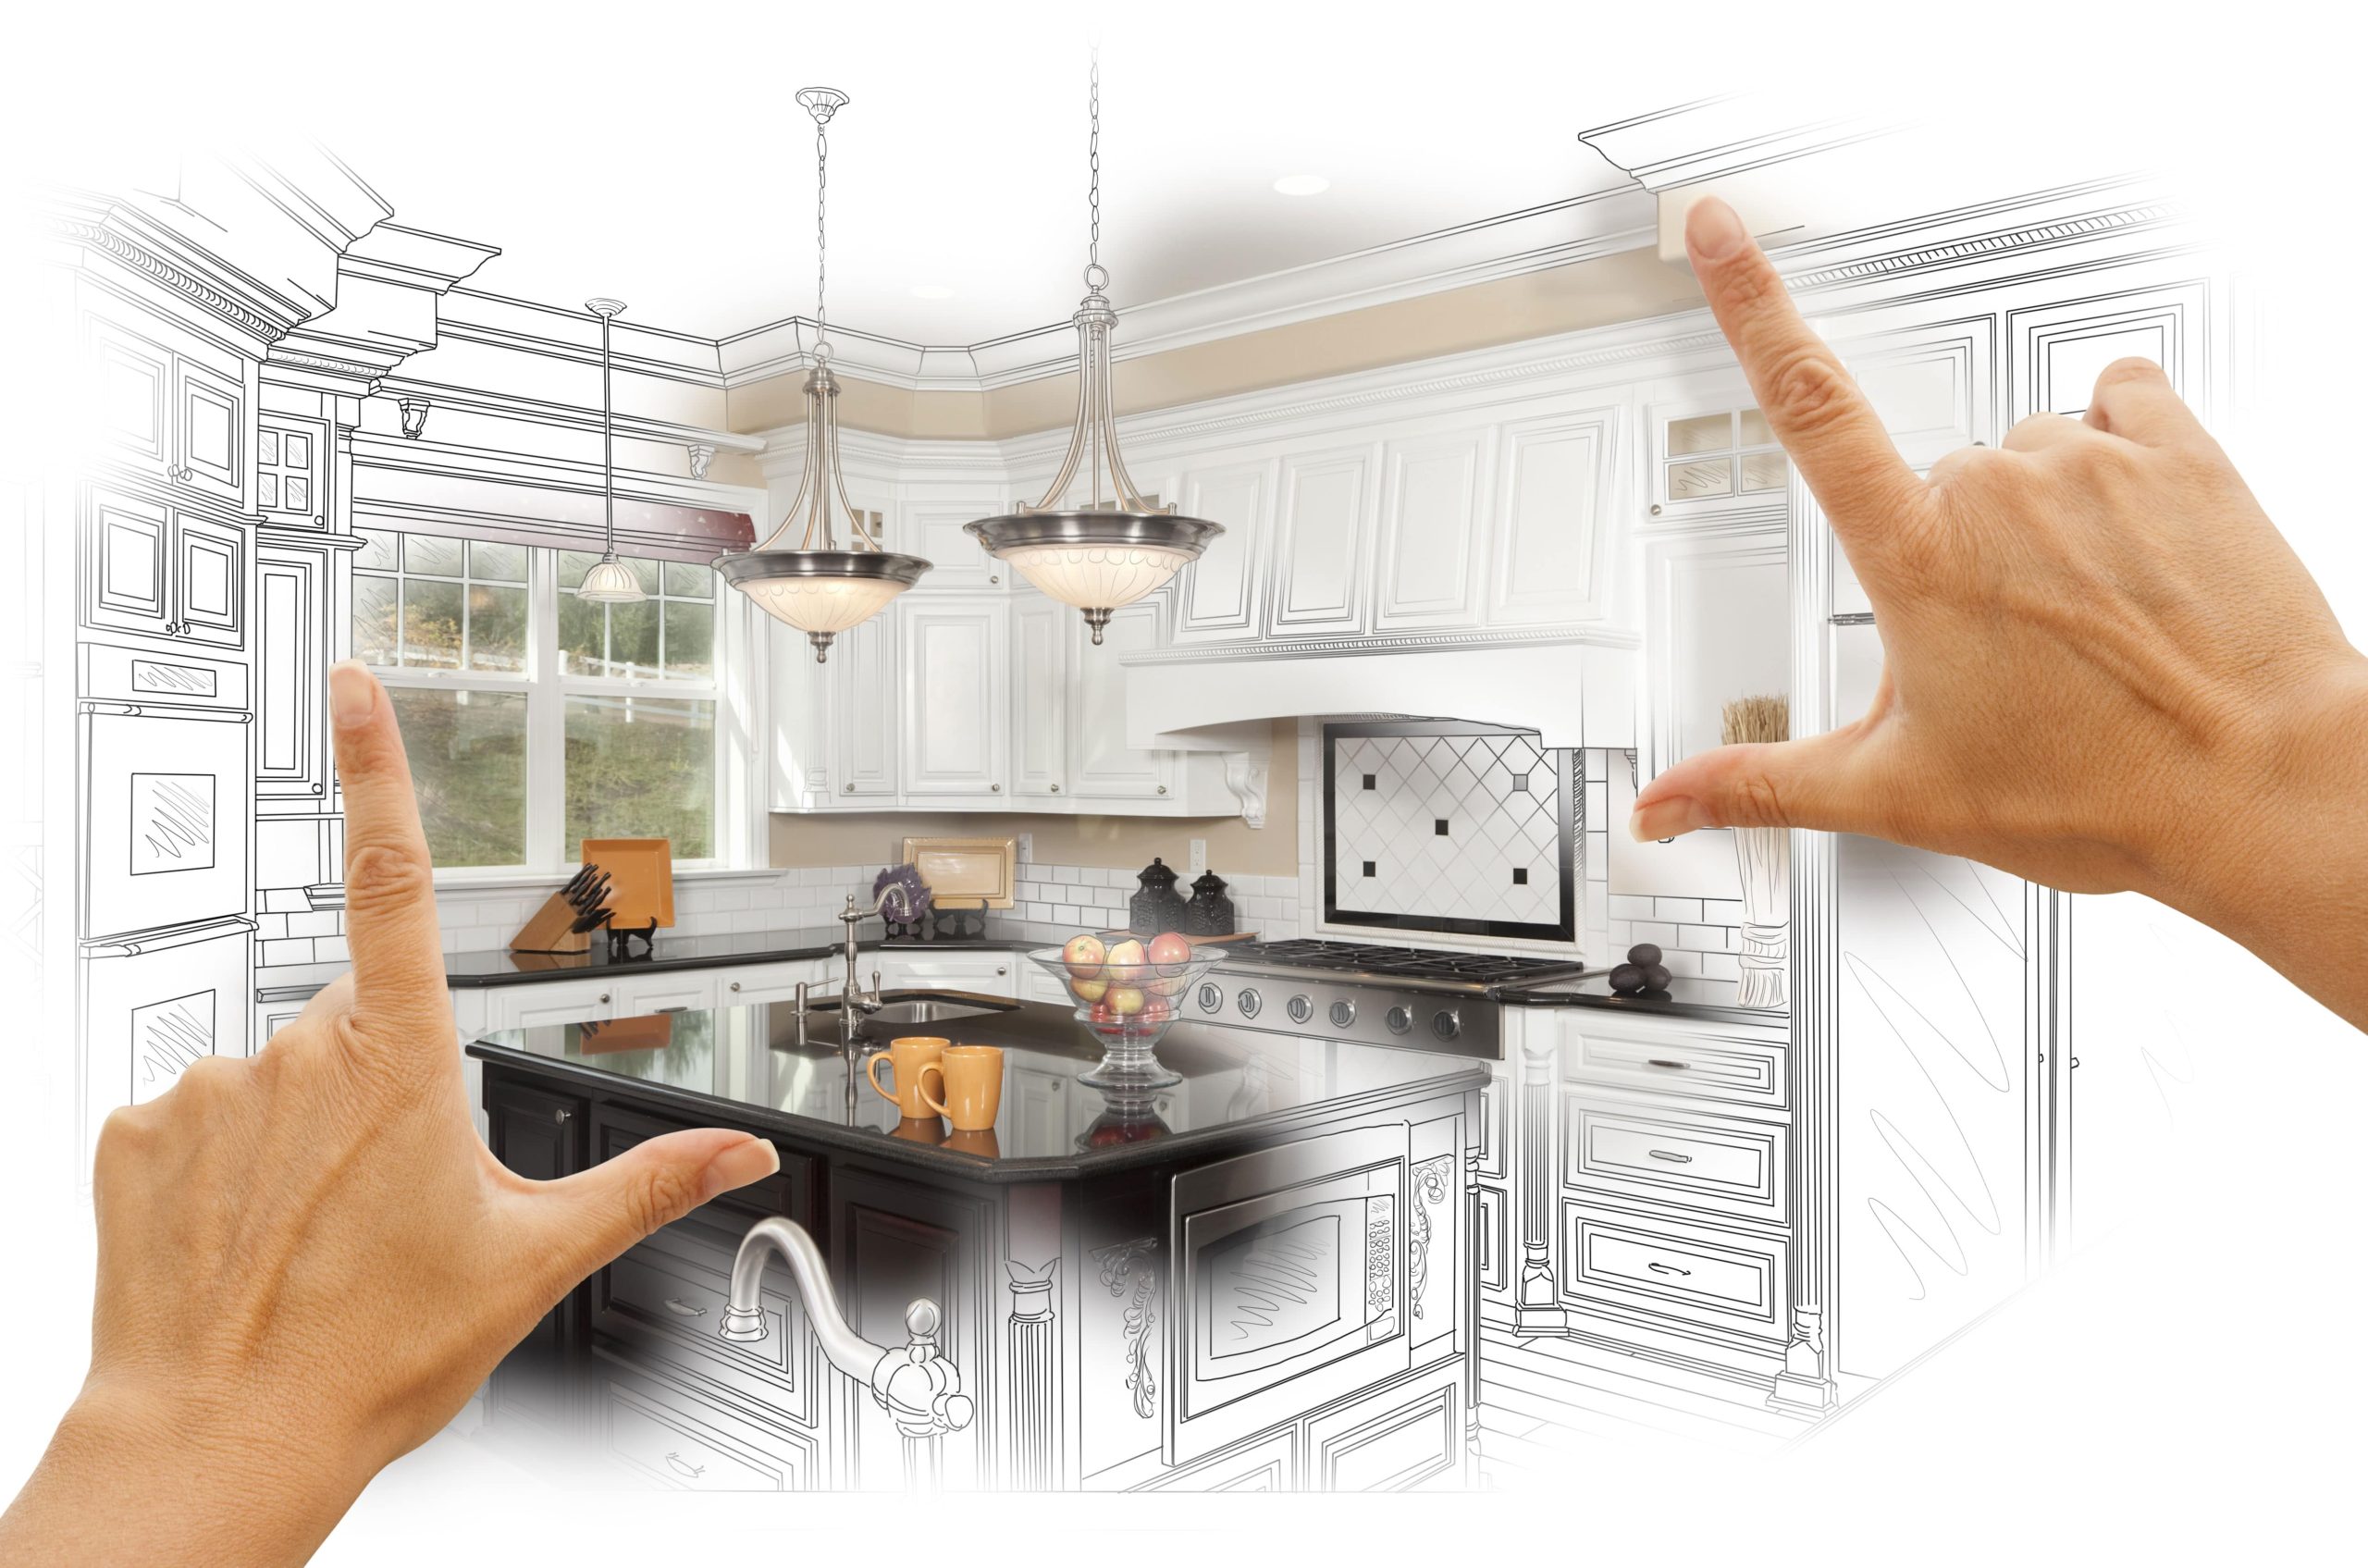 Our specialists in Cherry Hill, New Jersey help you create a kitchen that reflects your personal style and design.